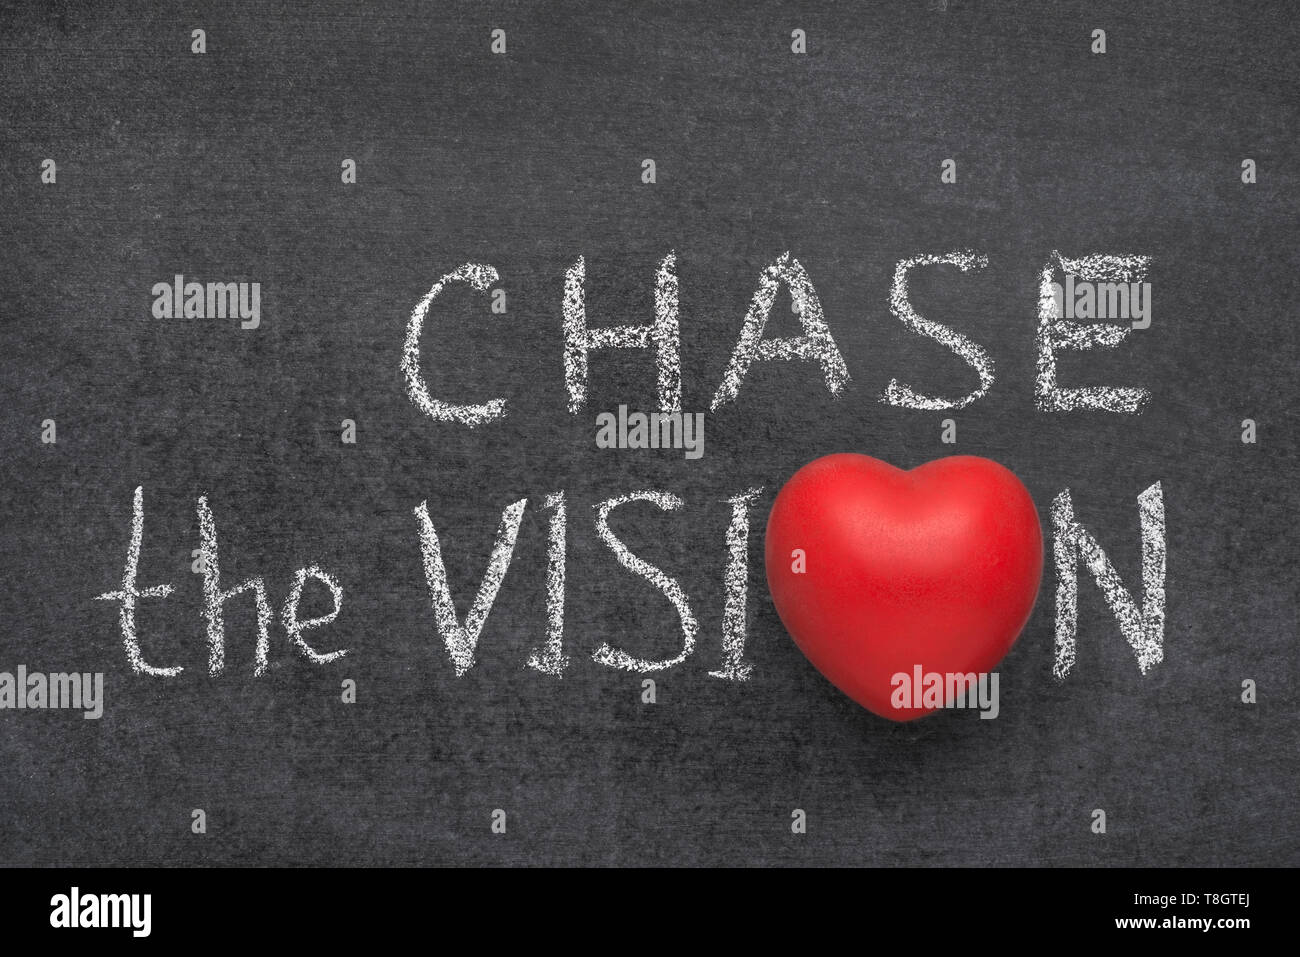 chase the vision phrase handwritten on blackboard with heart symbol instead of O Stock Photo